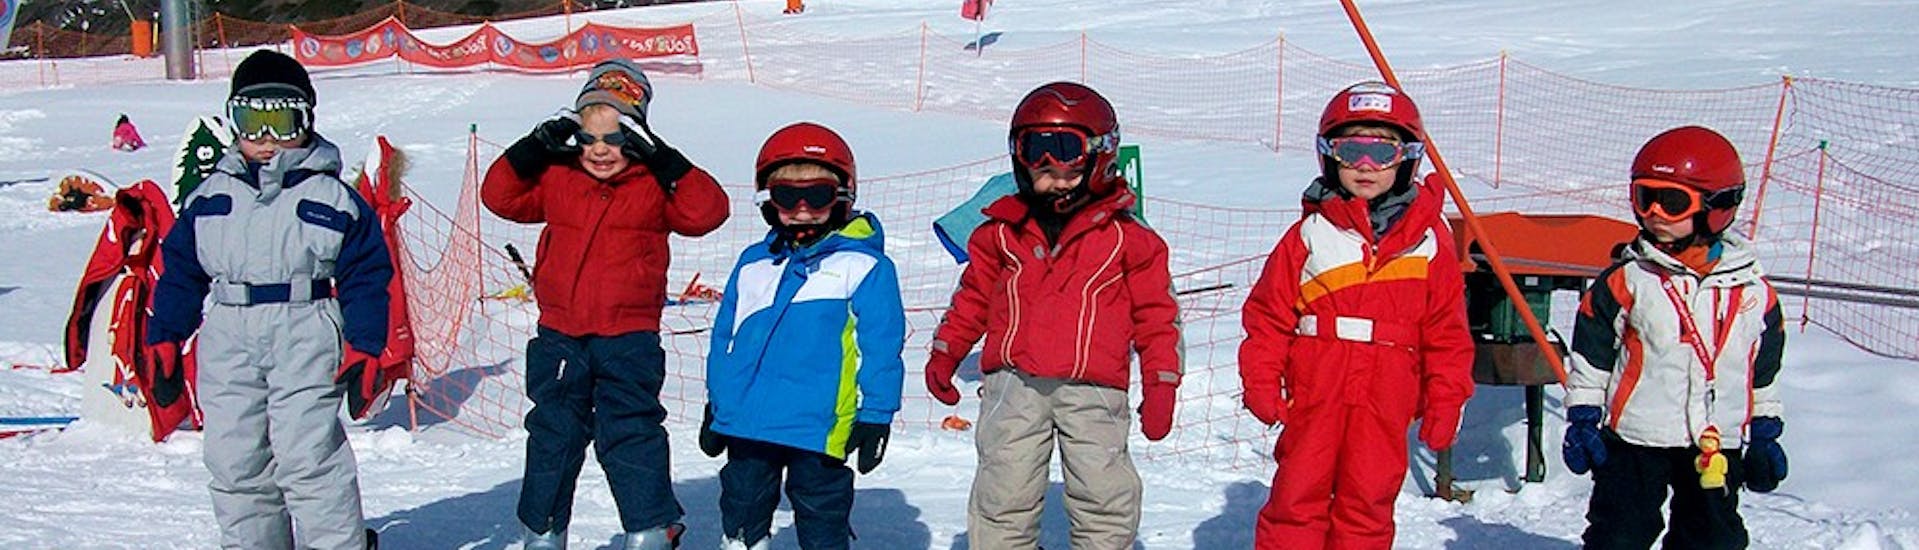 Budding skiers ready to plough snow during  kids ski lessons "Baby Skier" with the ski school ESF of Abriès Haut-Guil.